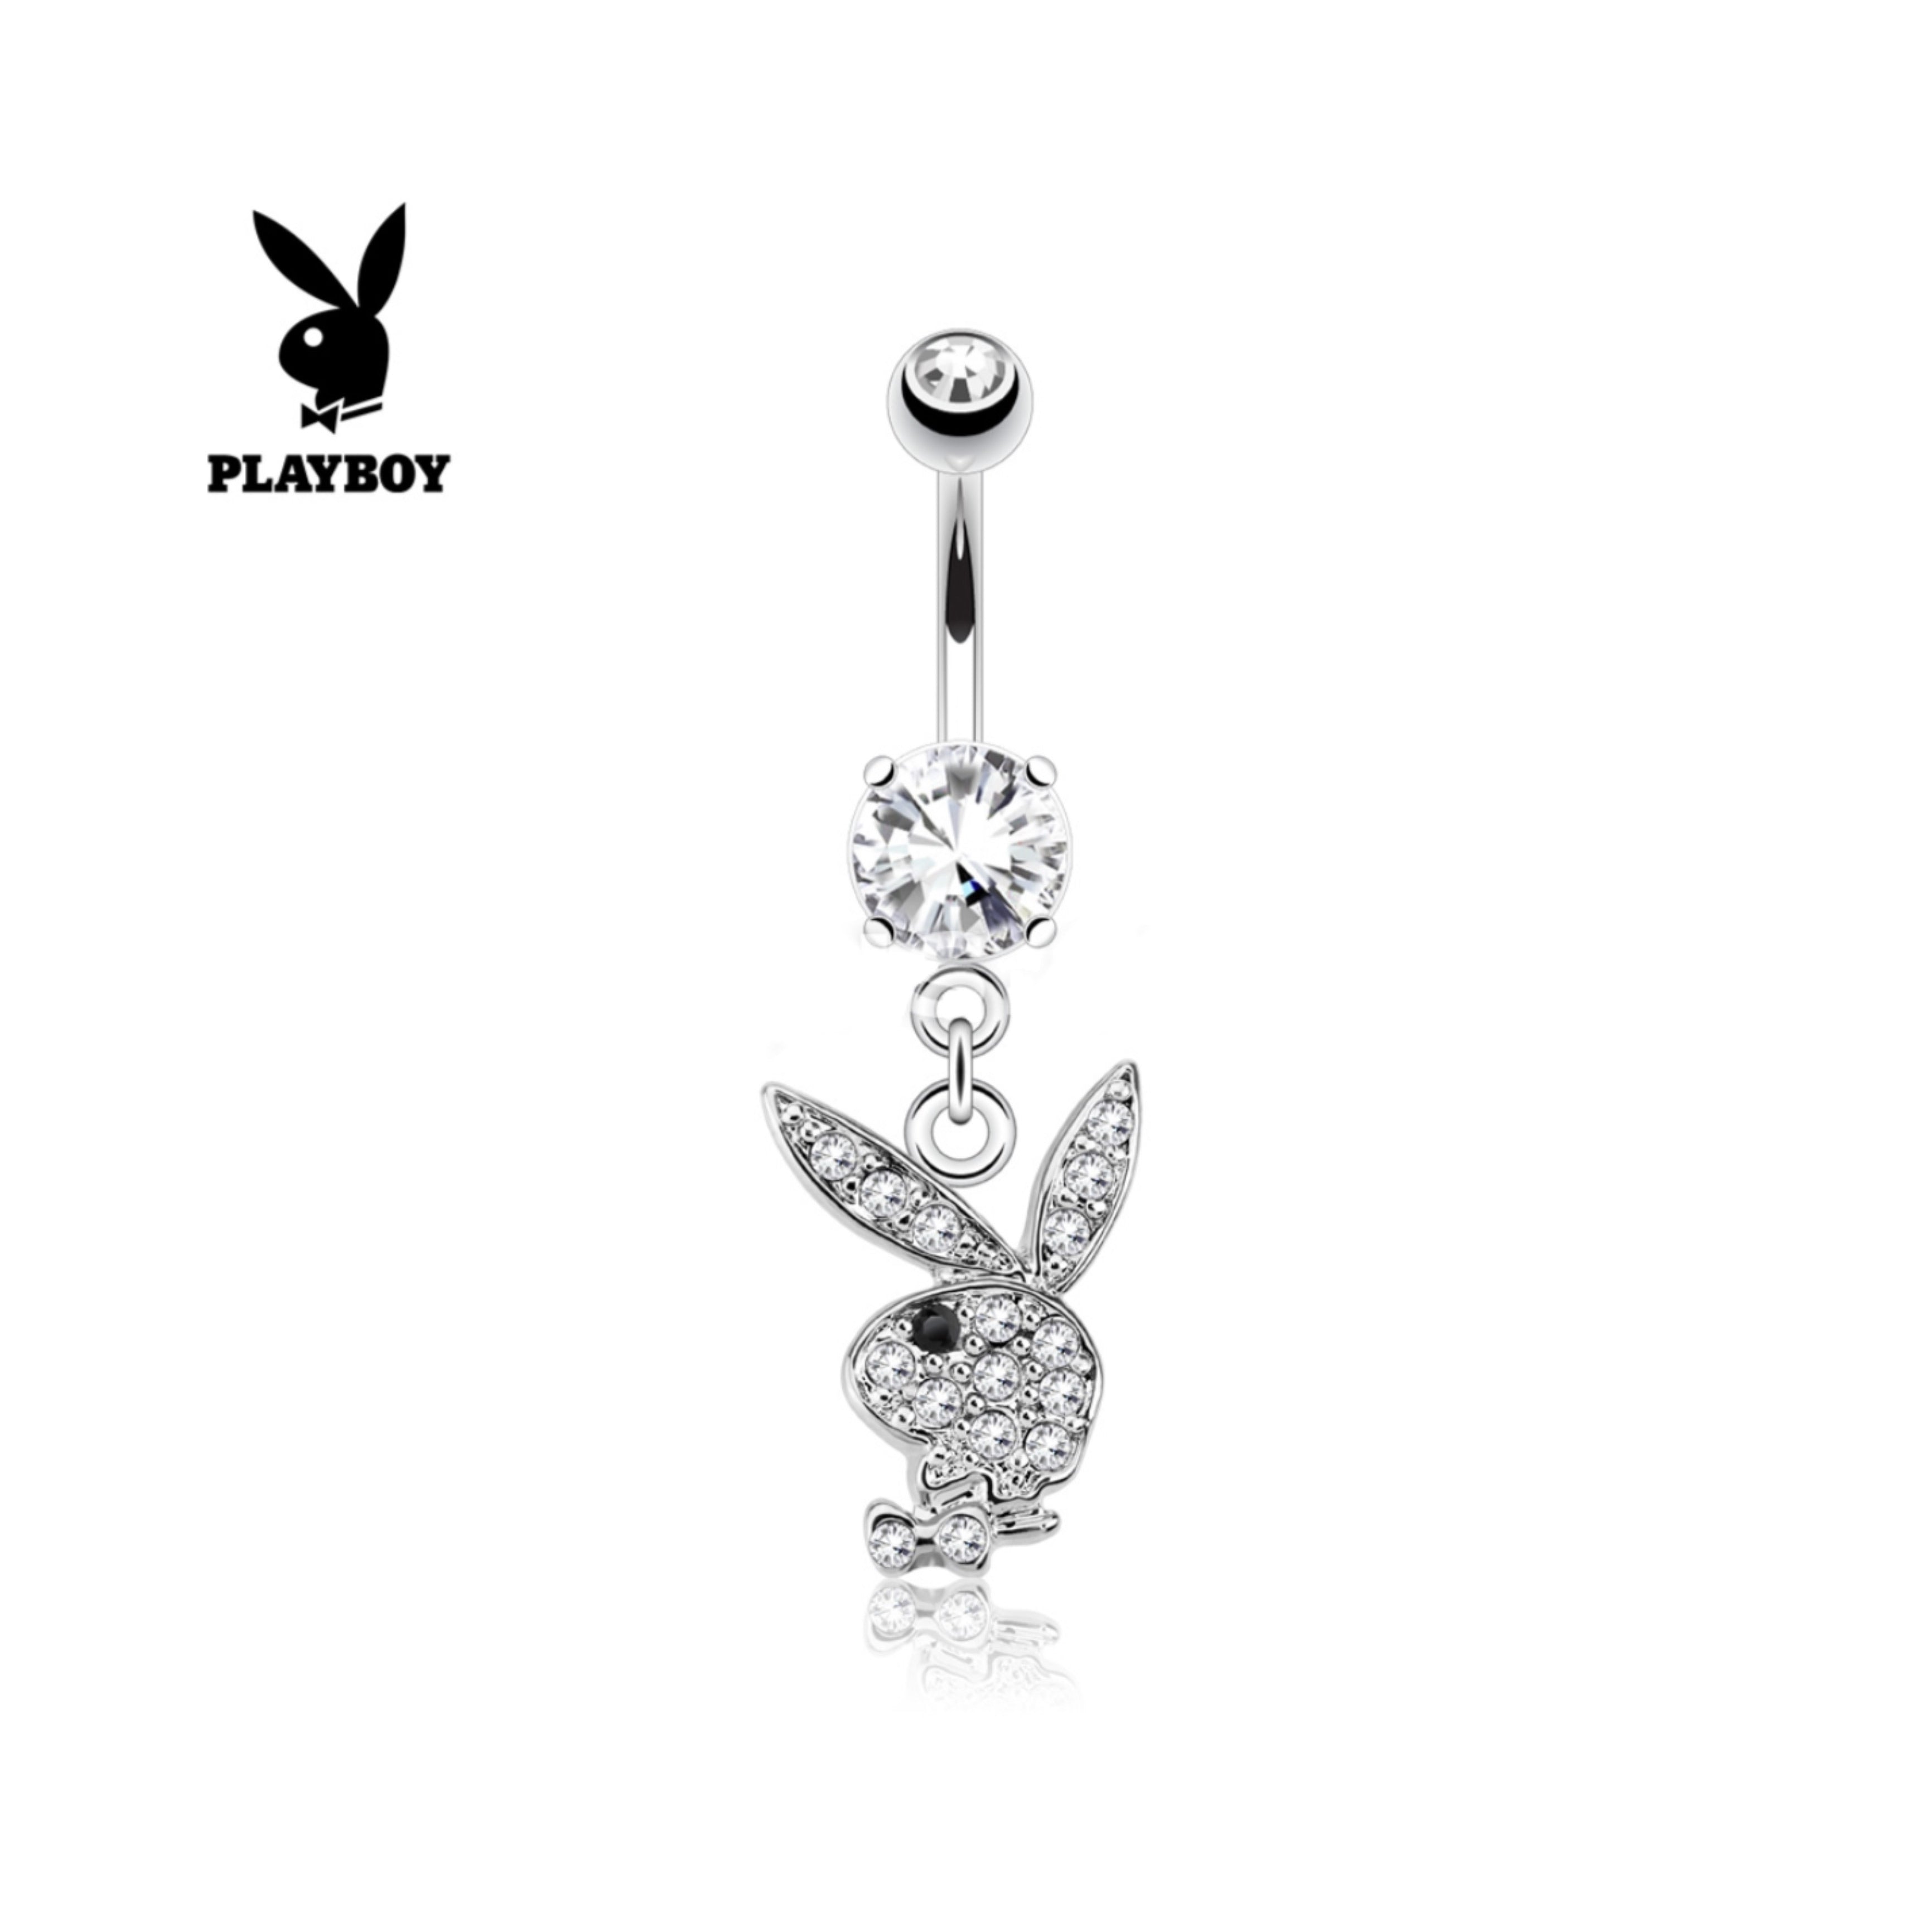 Silver Star Dangle Belly Button Ring Y2K 2000s Sparkly Body Jewelry  Surgical Steel Navel Piercing 14G 10MM Crystal Cosmic - Etsy | Piercing  all'ombelico, Piercing, Piercing ombelico